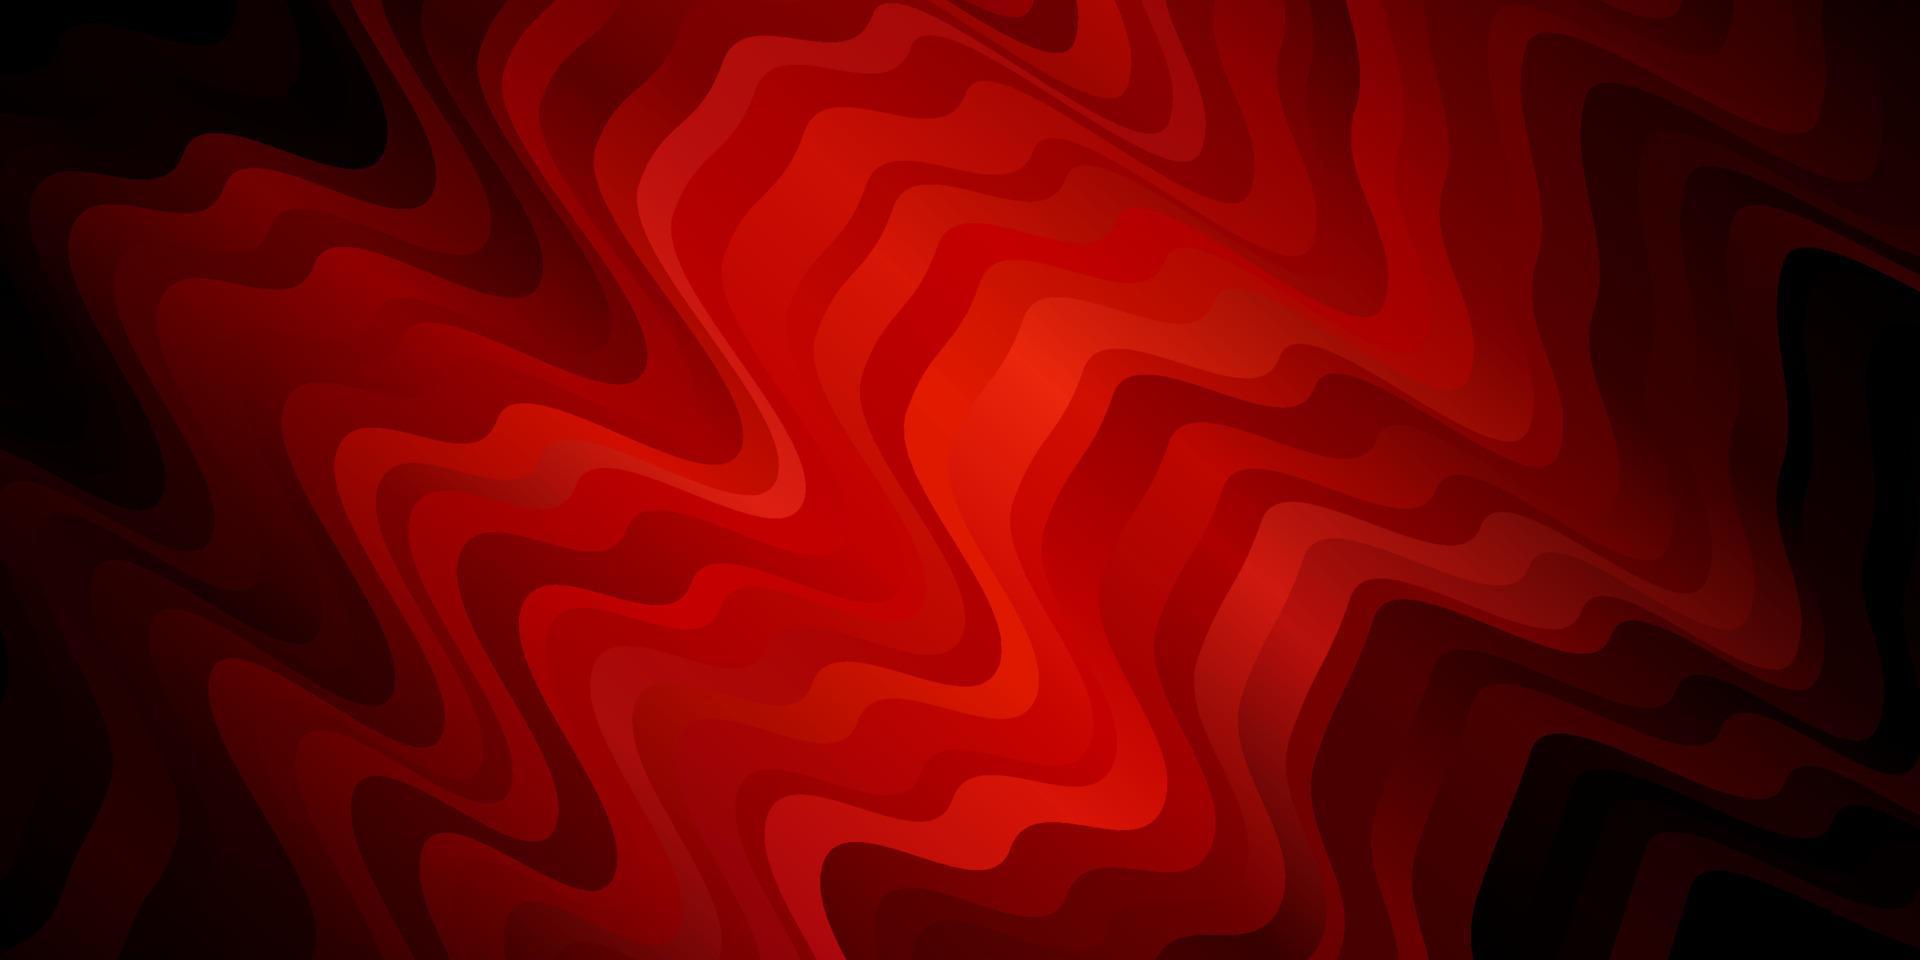 Dark Pink, Red vector pattern with curves.